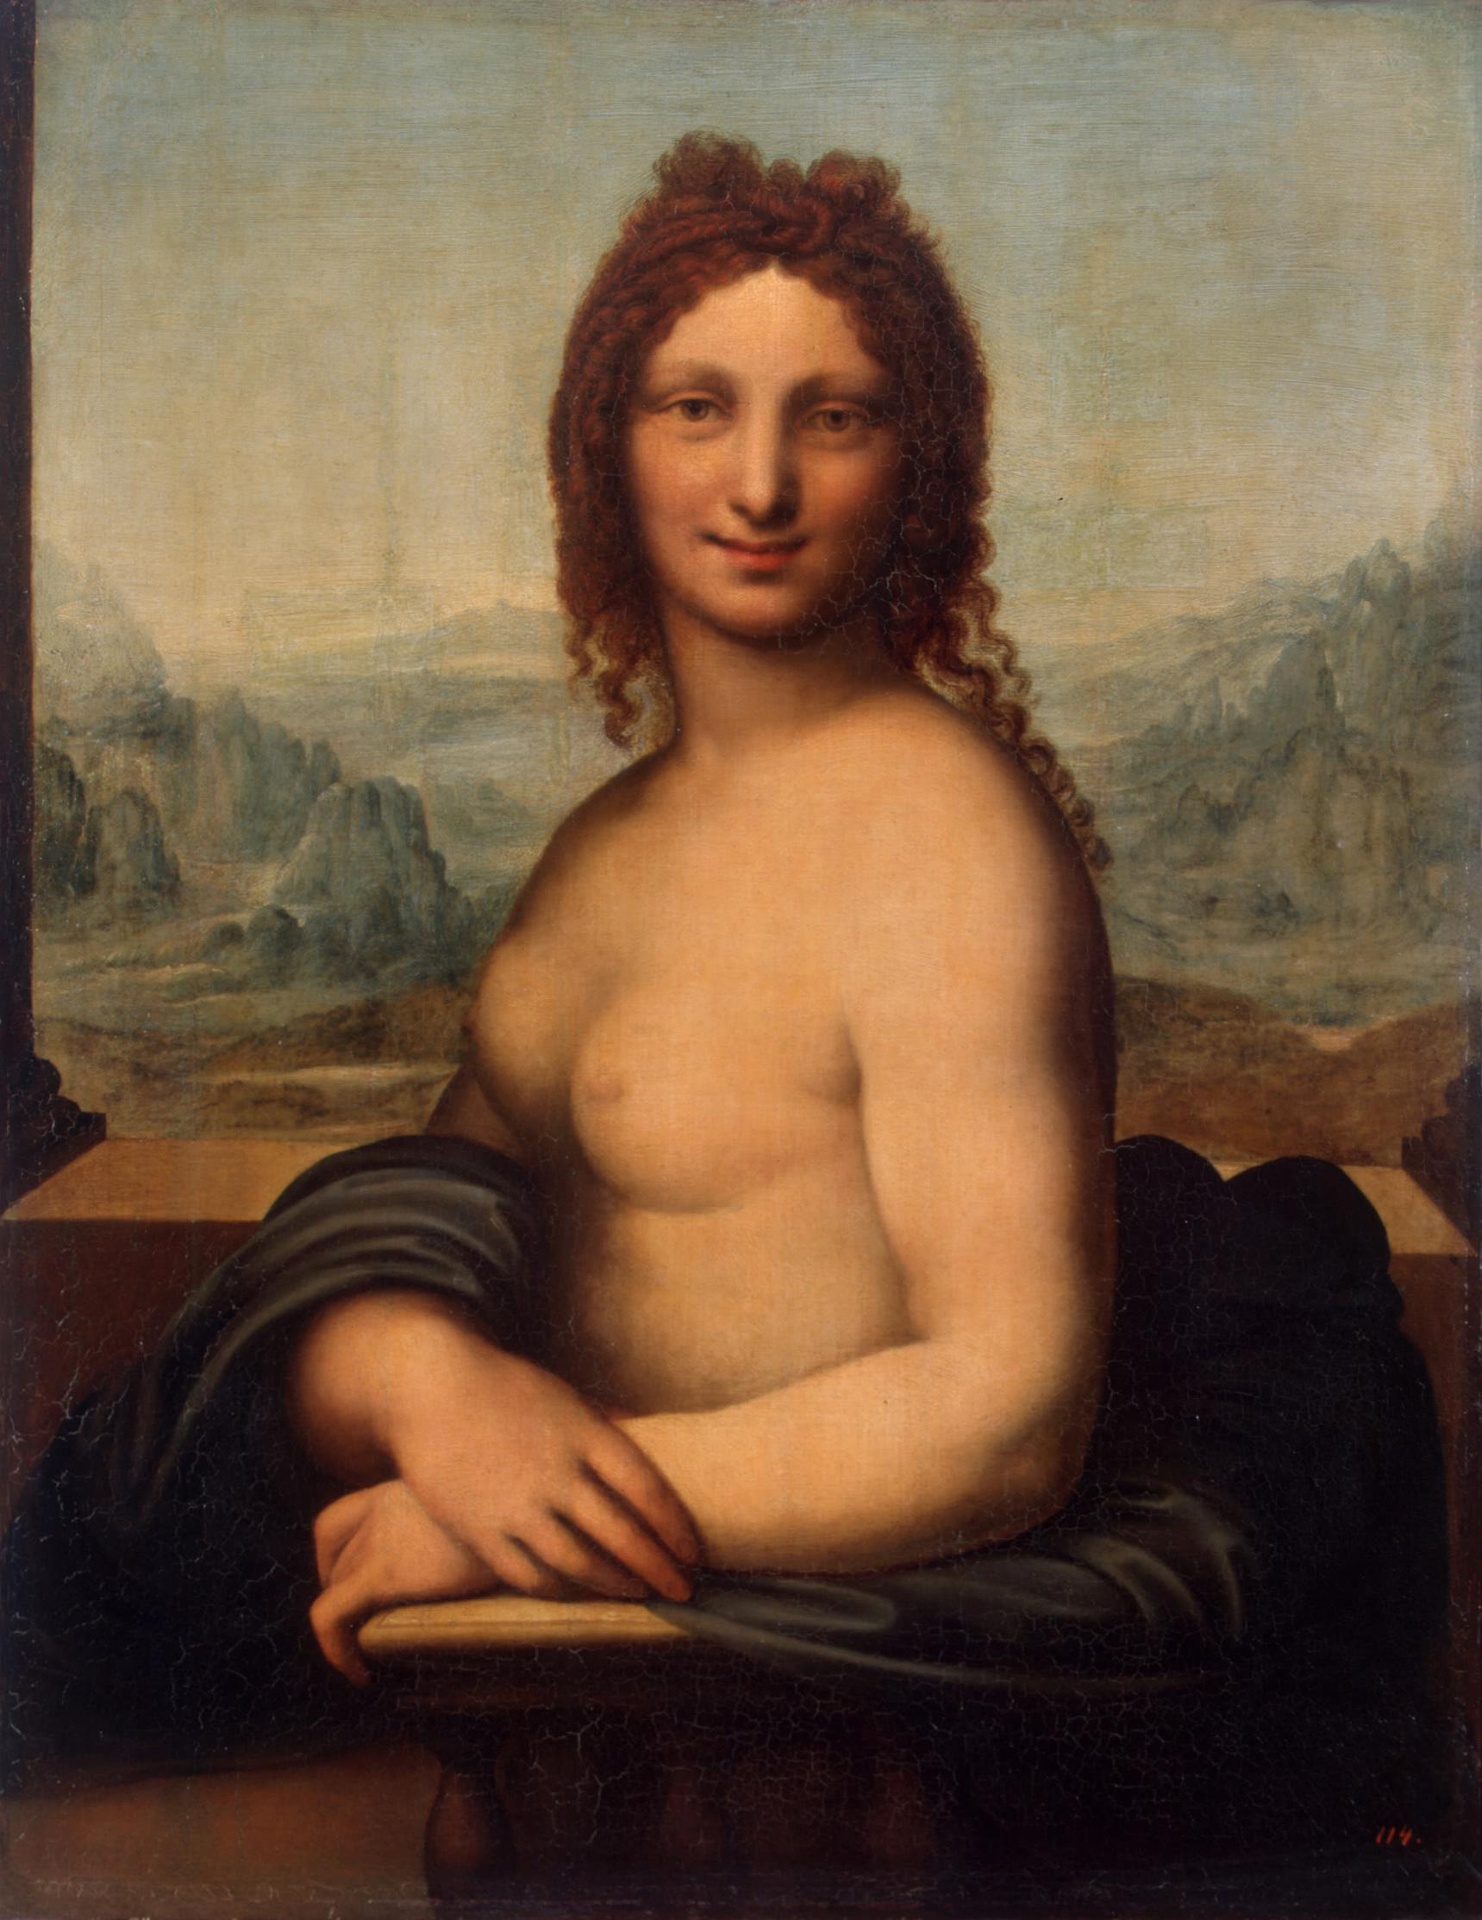 Nude Woman (Donna Nuda) by Unknown Artist - late 16th century - 86.5 x 66.5 cm Hermitage Museum